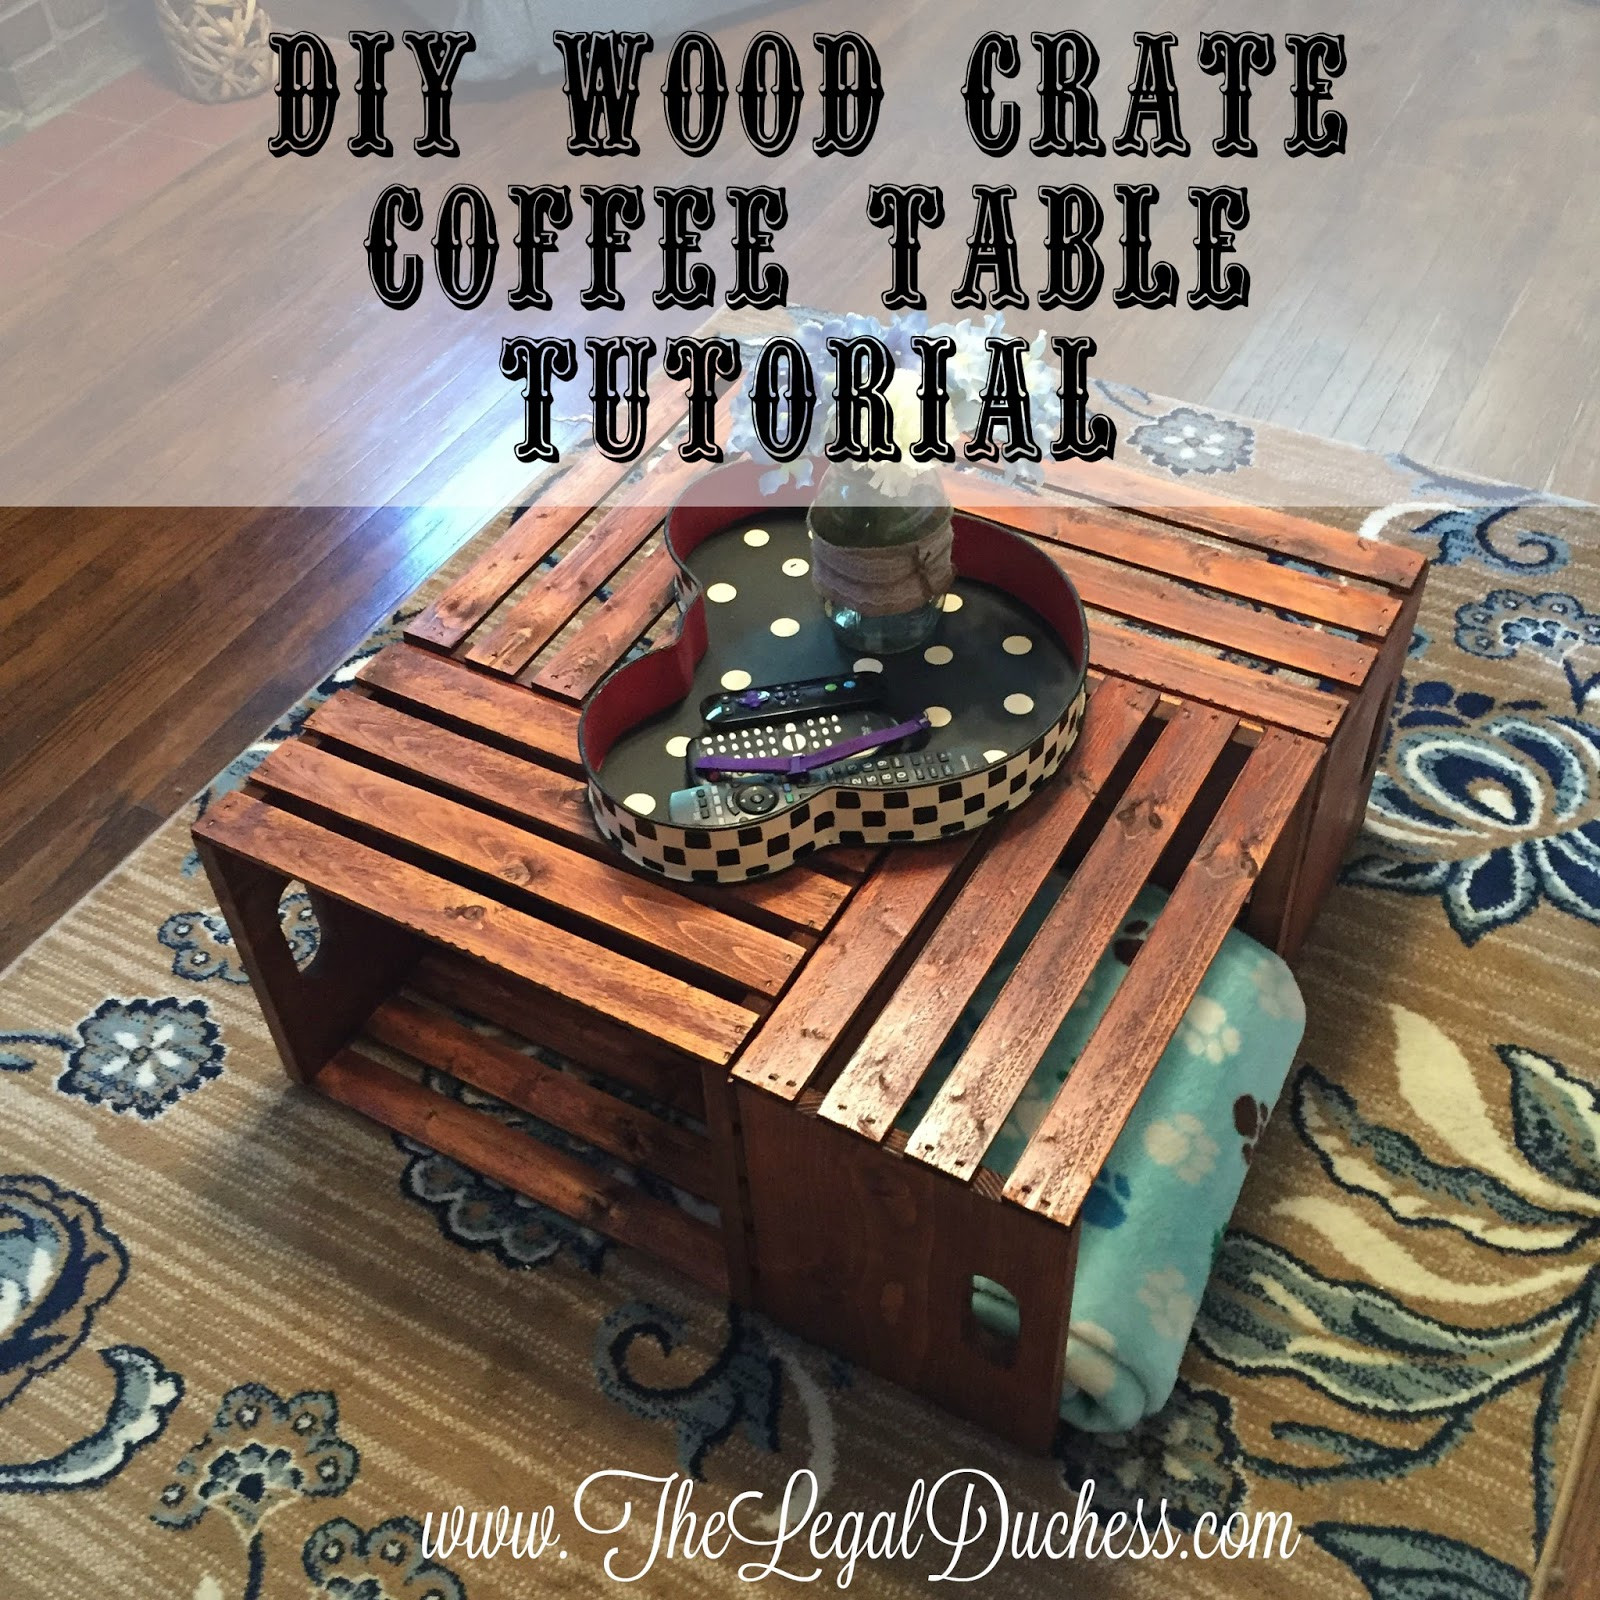 DIY Wood Crate
 DIY Wooden Crate Coffee Table The Legal Duchess